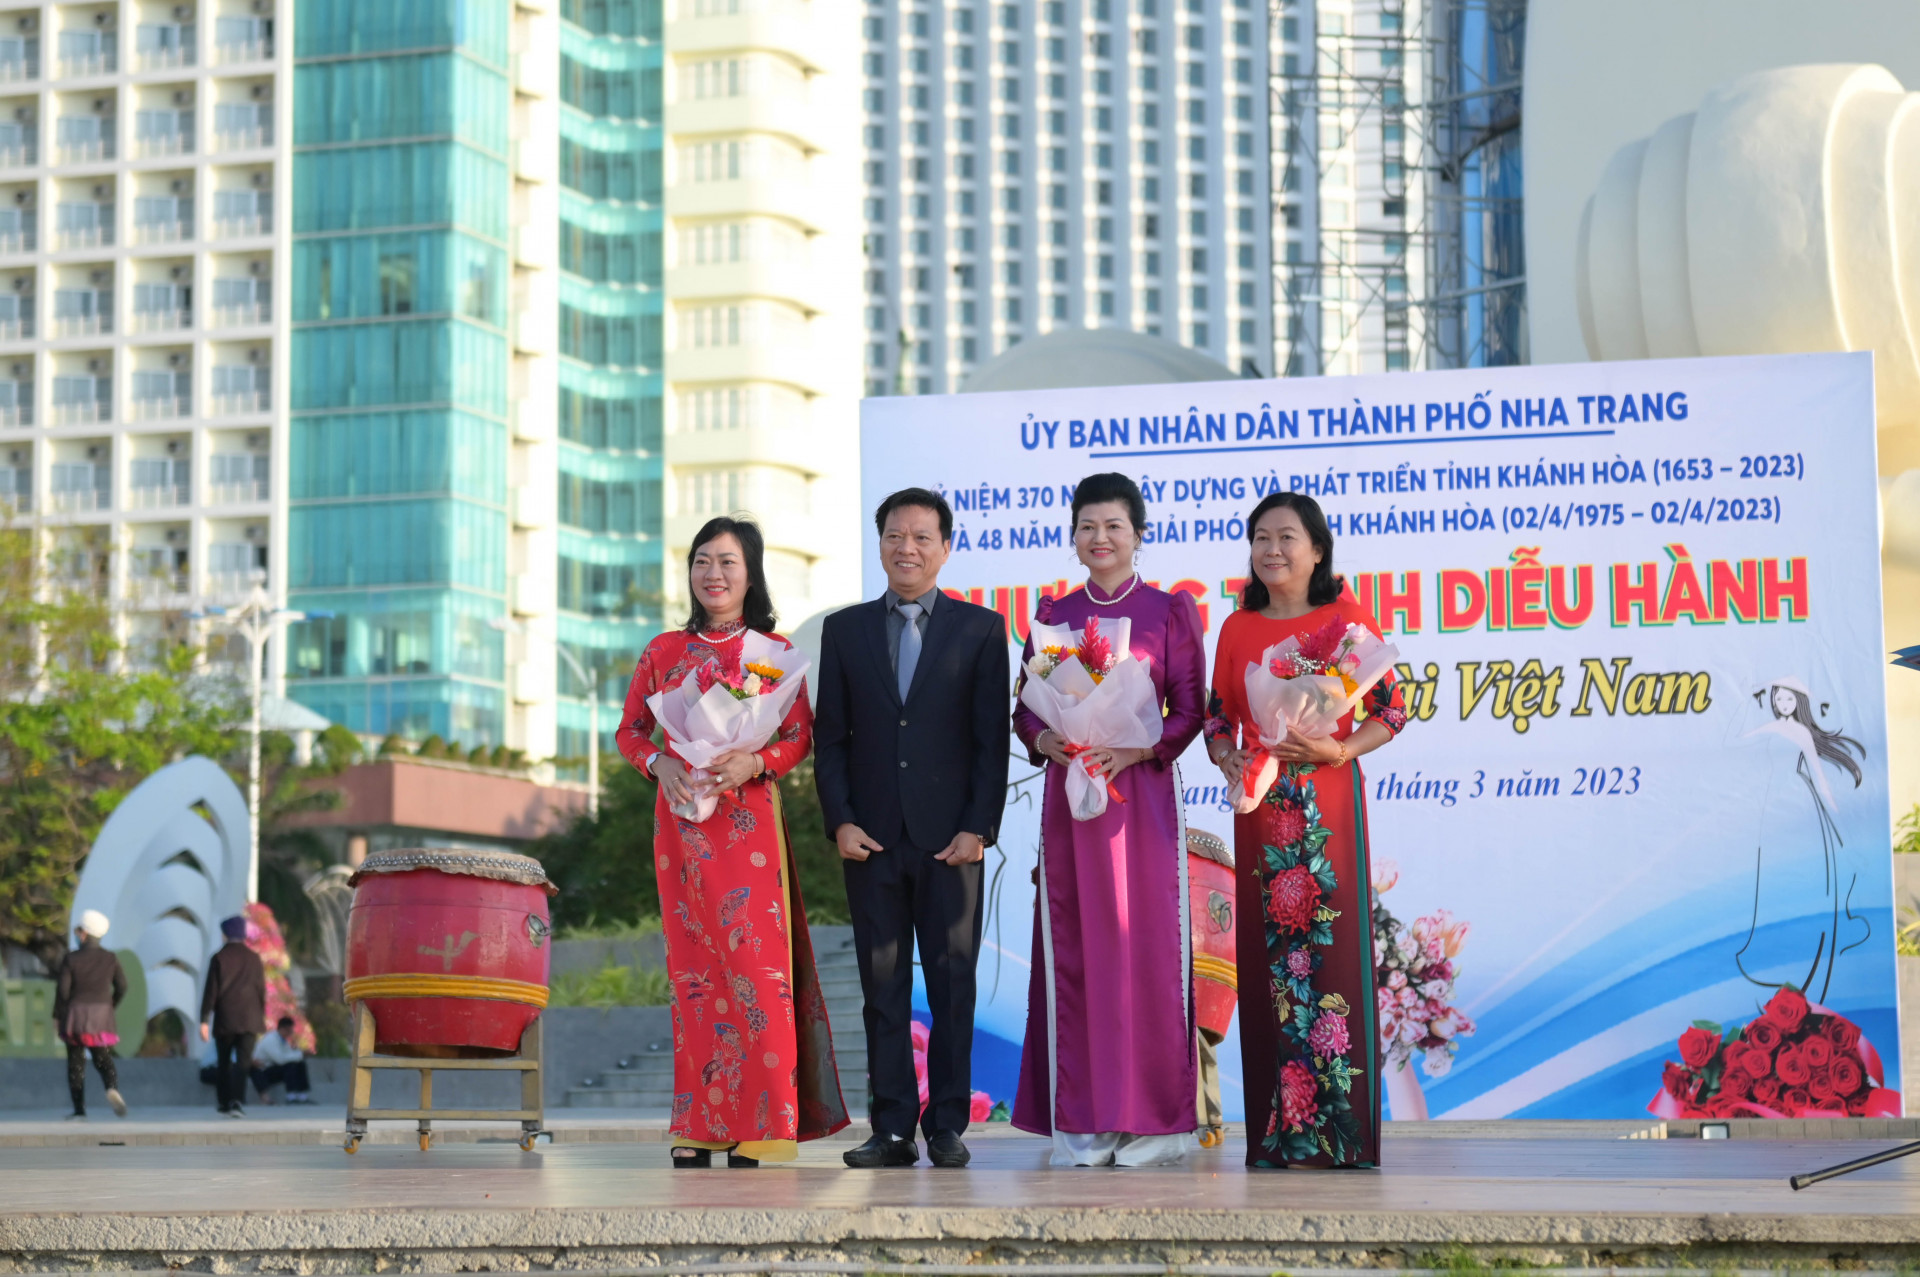 Phan Thanh Liem, vice-chairman of Nha Trang City People’s Committee, offering flowers to the leadership of Nha Trang City Women's Union